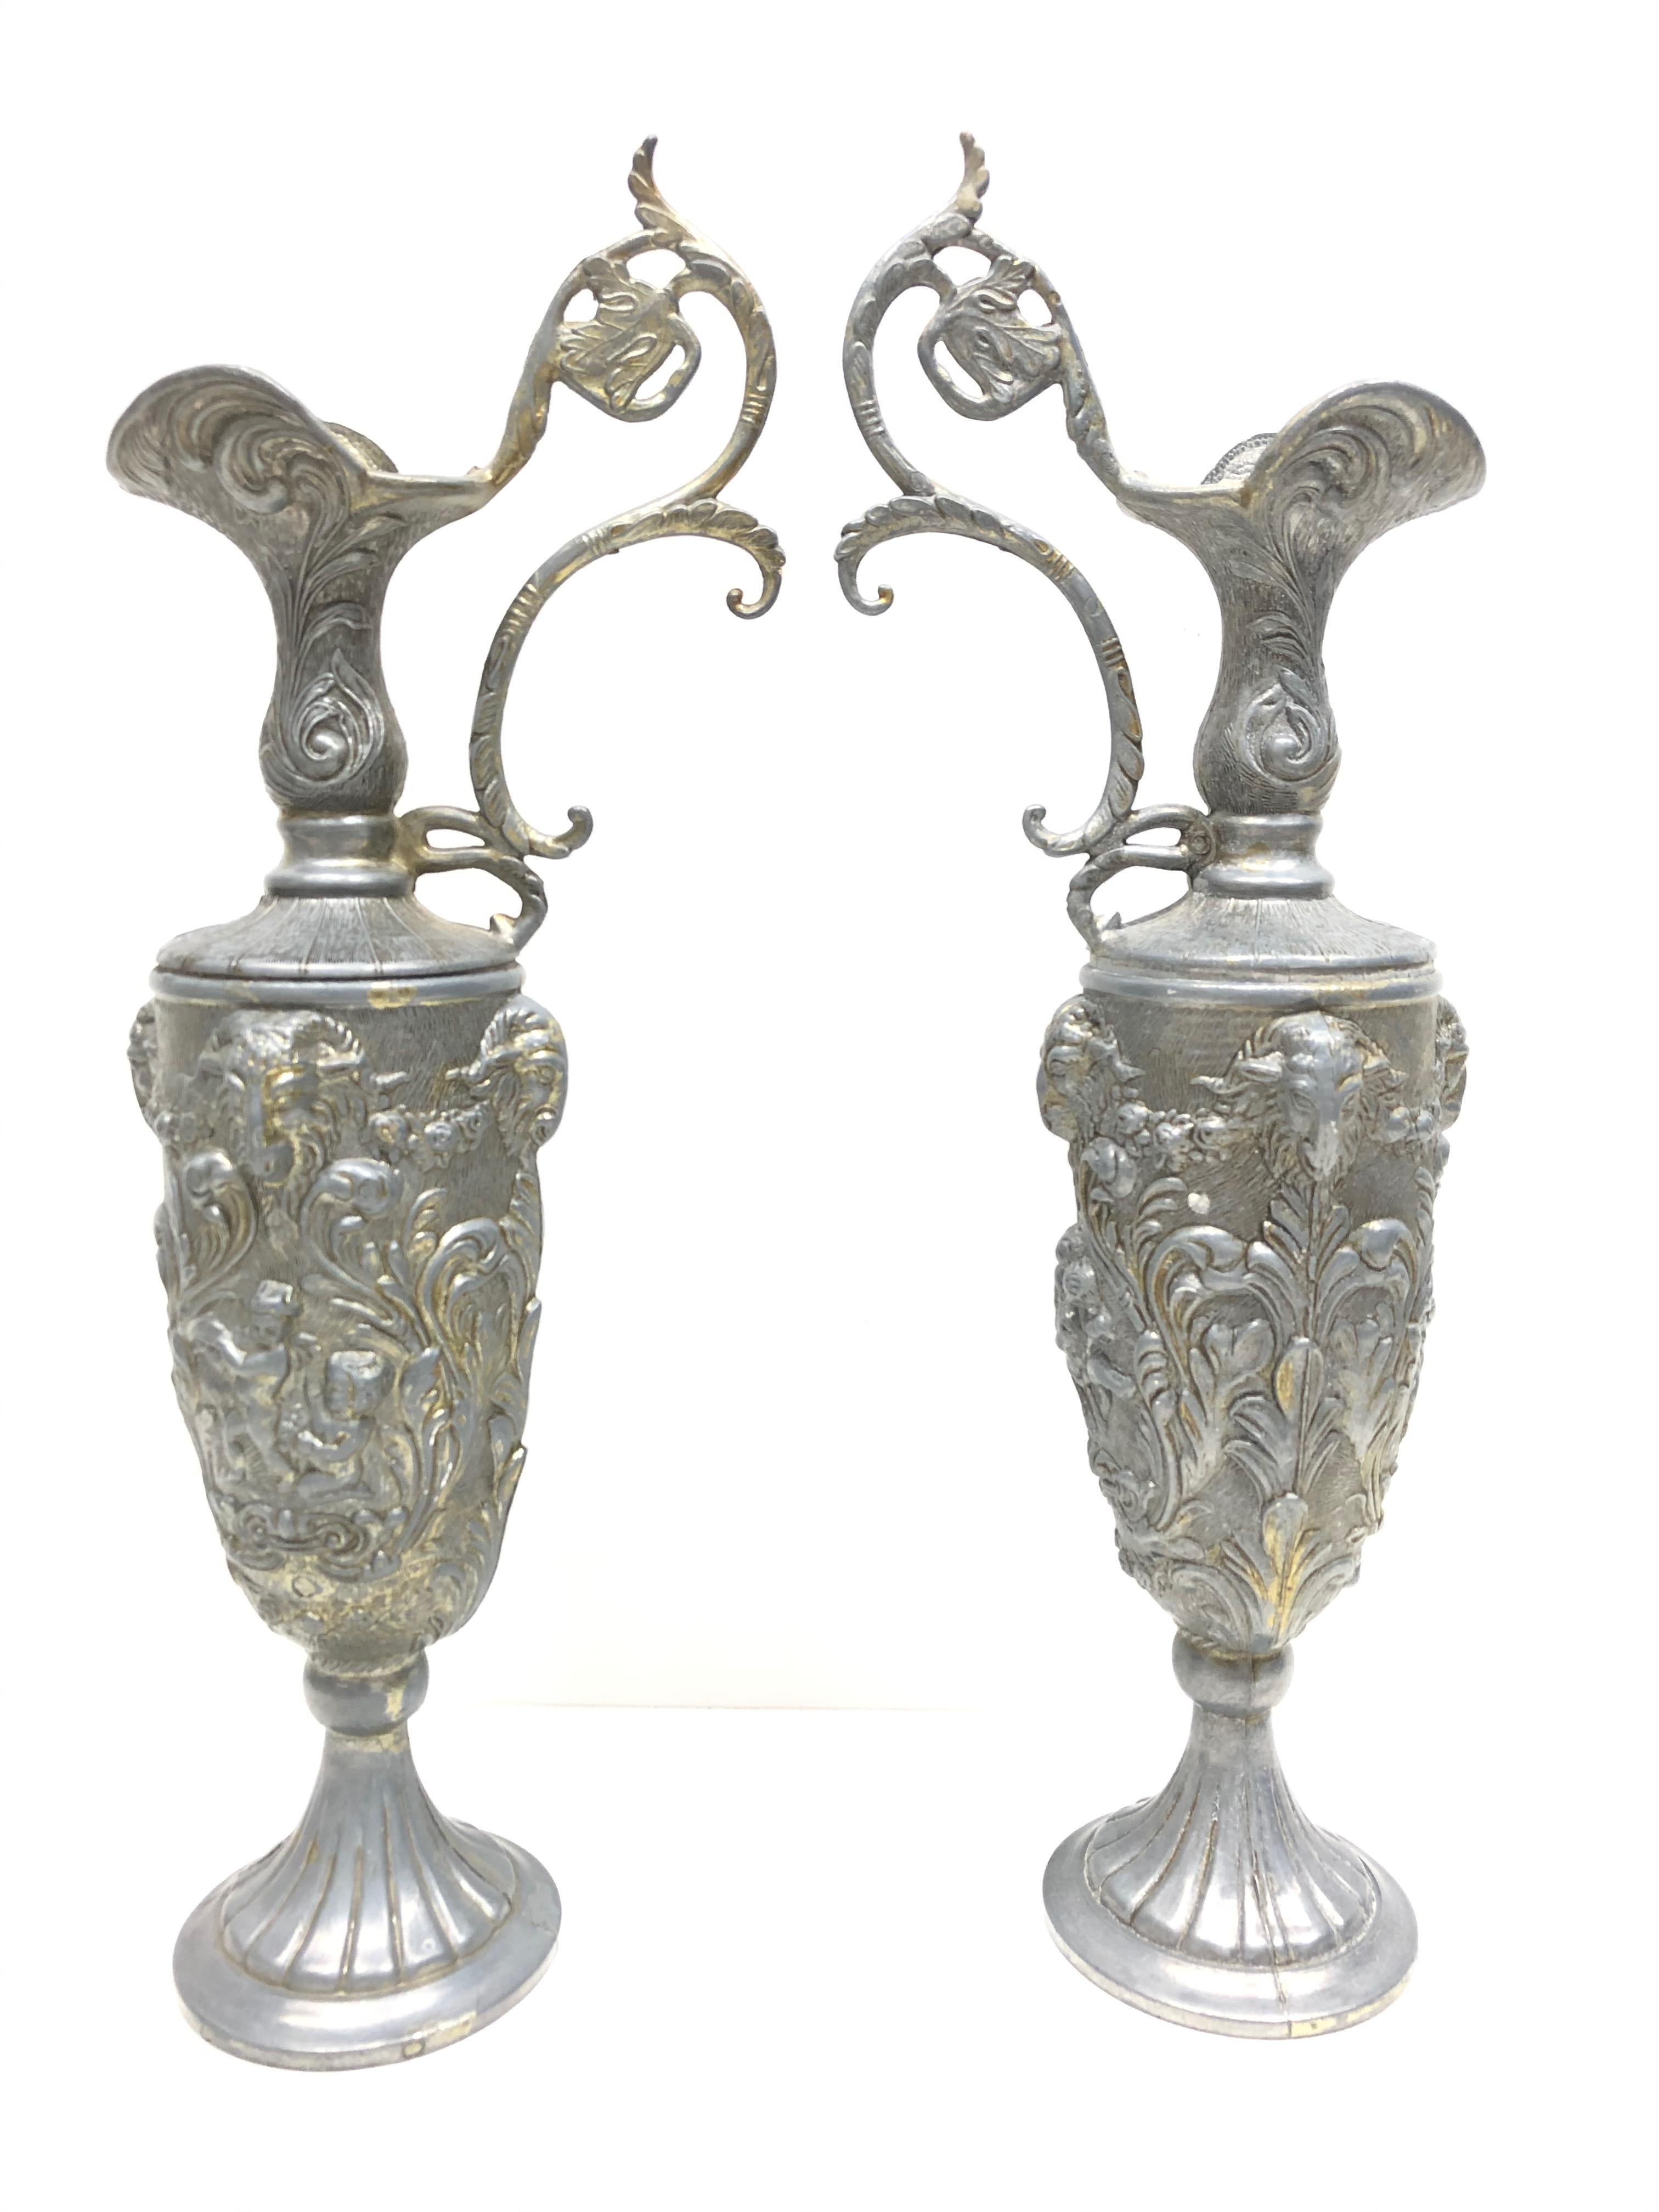 A pair of large amazing pewter vases, Ewer, or Amphoras made in Italy. Vases are in very good condition with a nice patina. Marked on the bottom 90% peltrato.